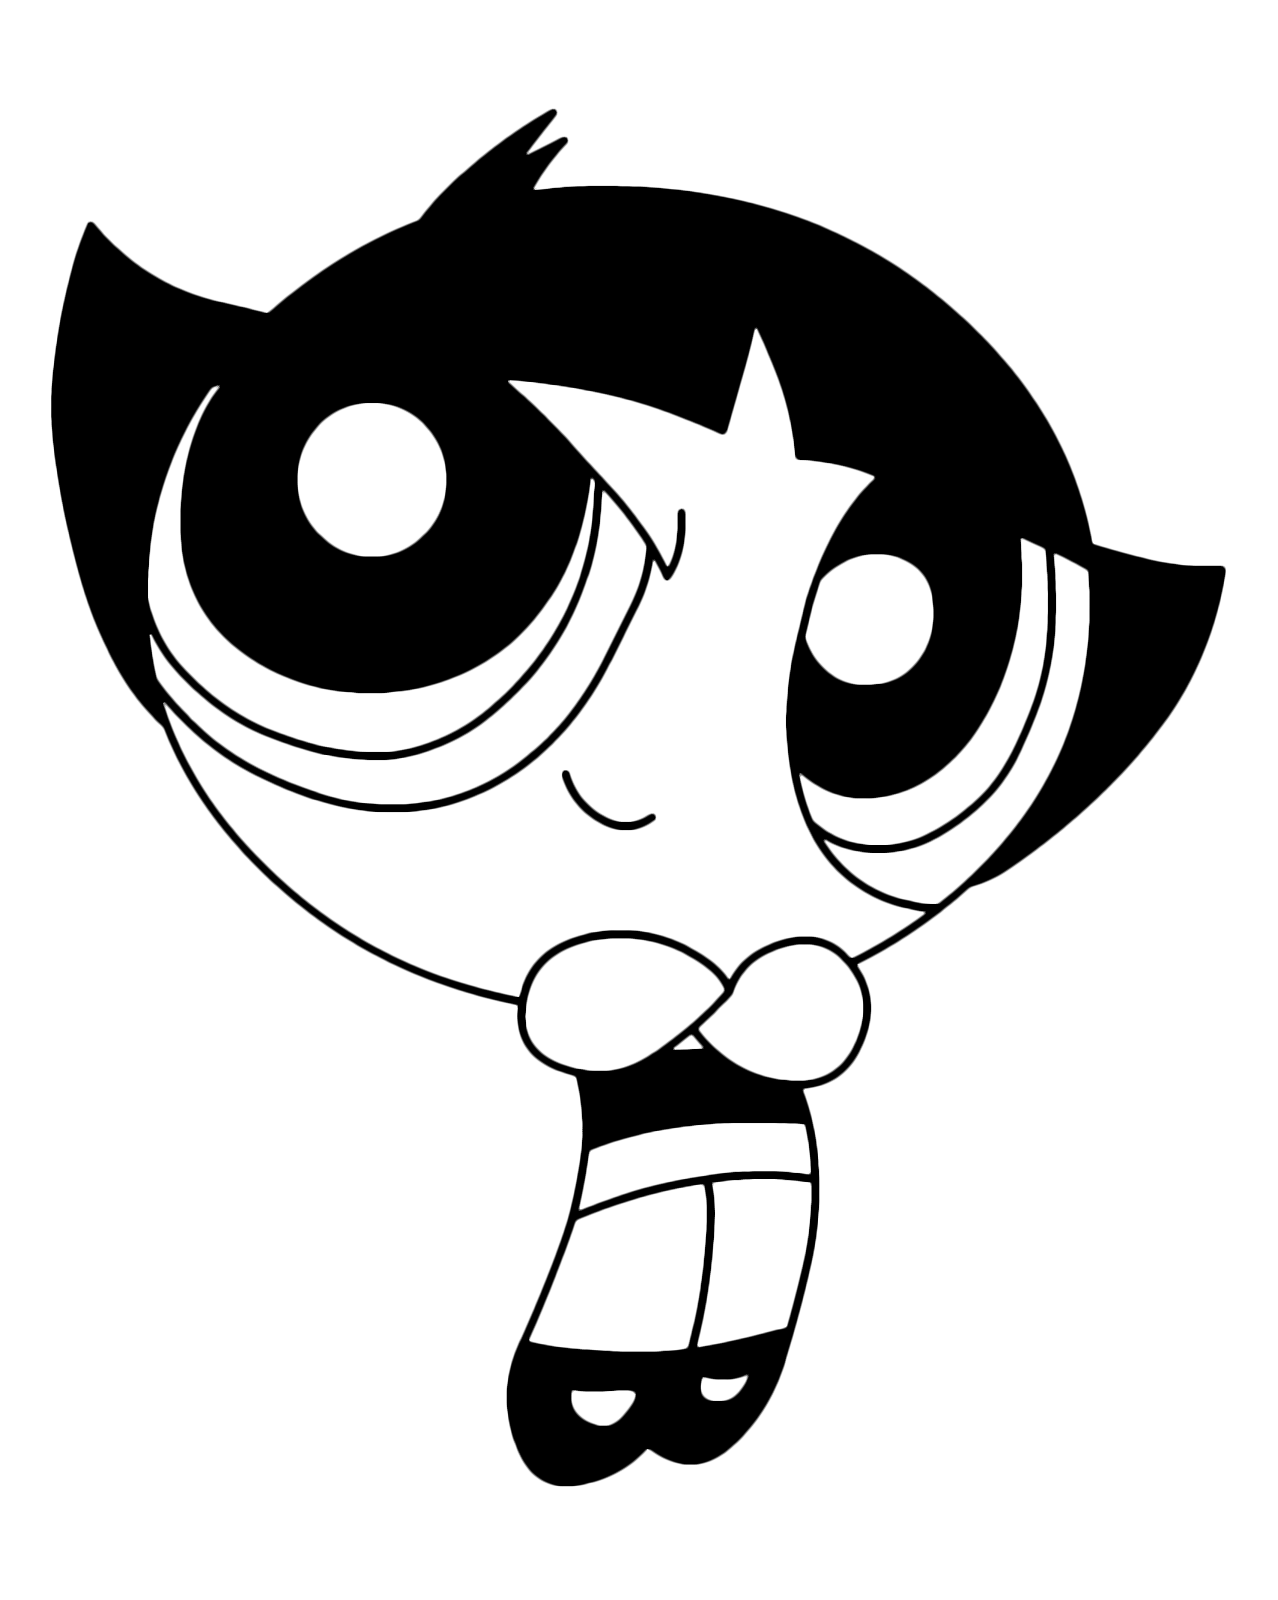 The Powerpuff Girls - Buttercup with crossed arms